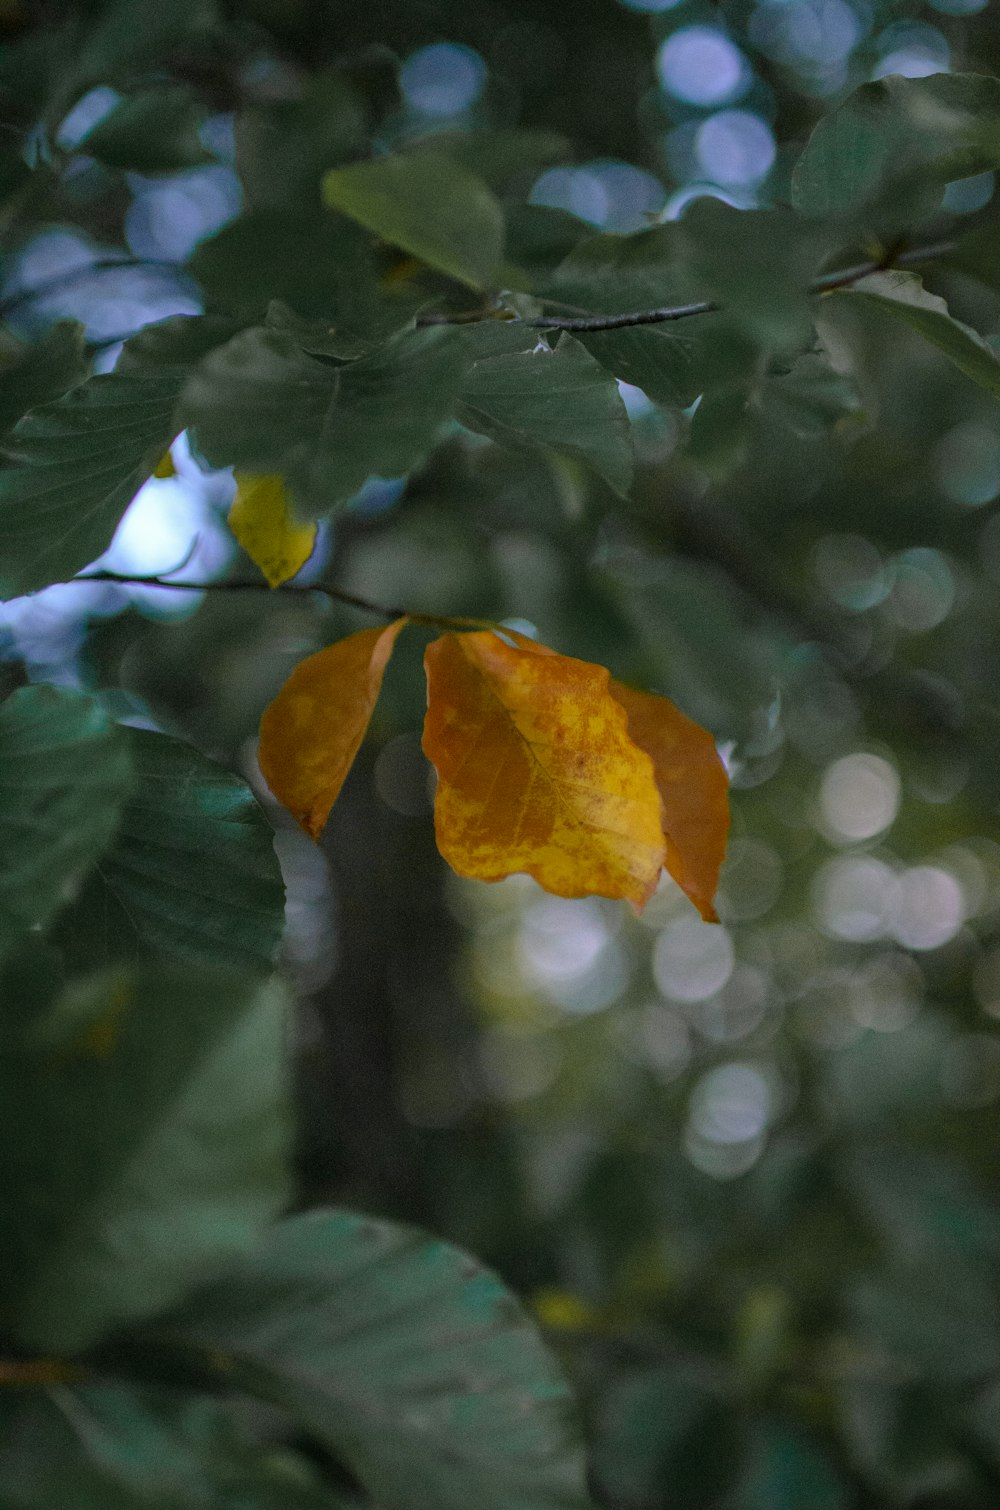 a leaf that is sitting on a tree branch